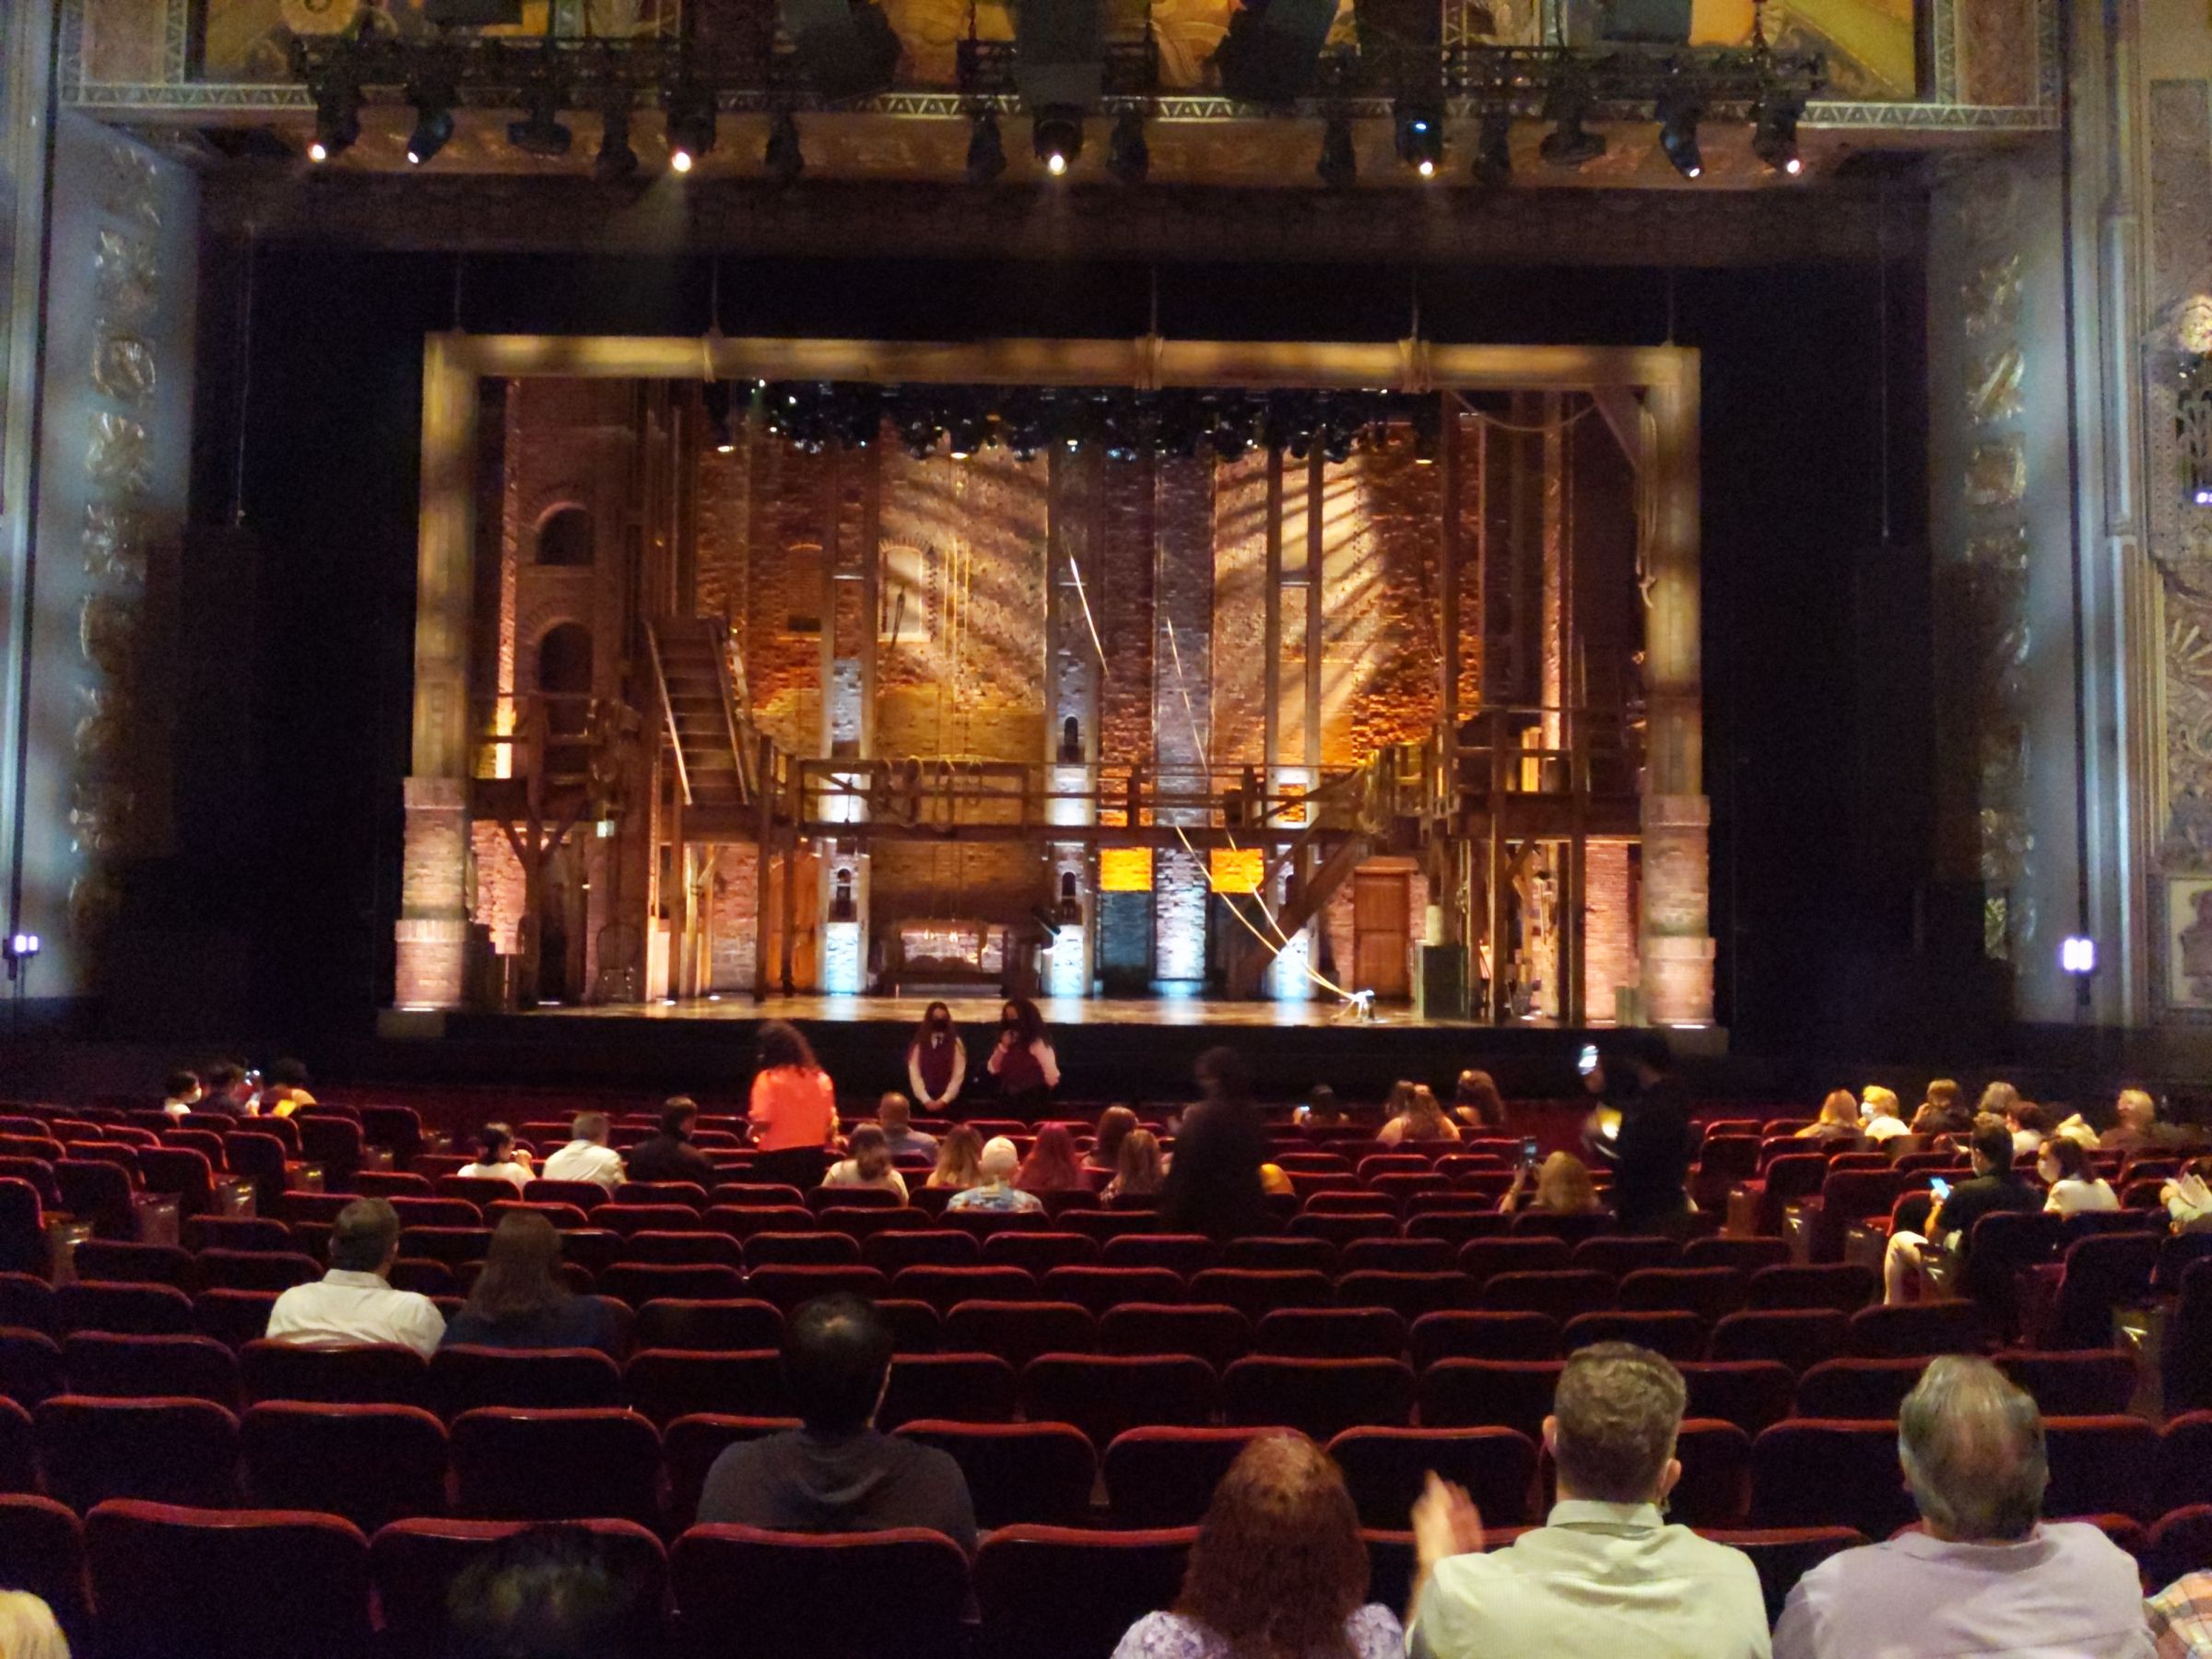 orchestra center, row s seat view  - hollywood pantages theatre